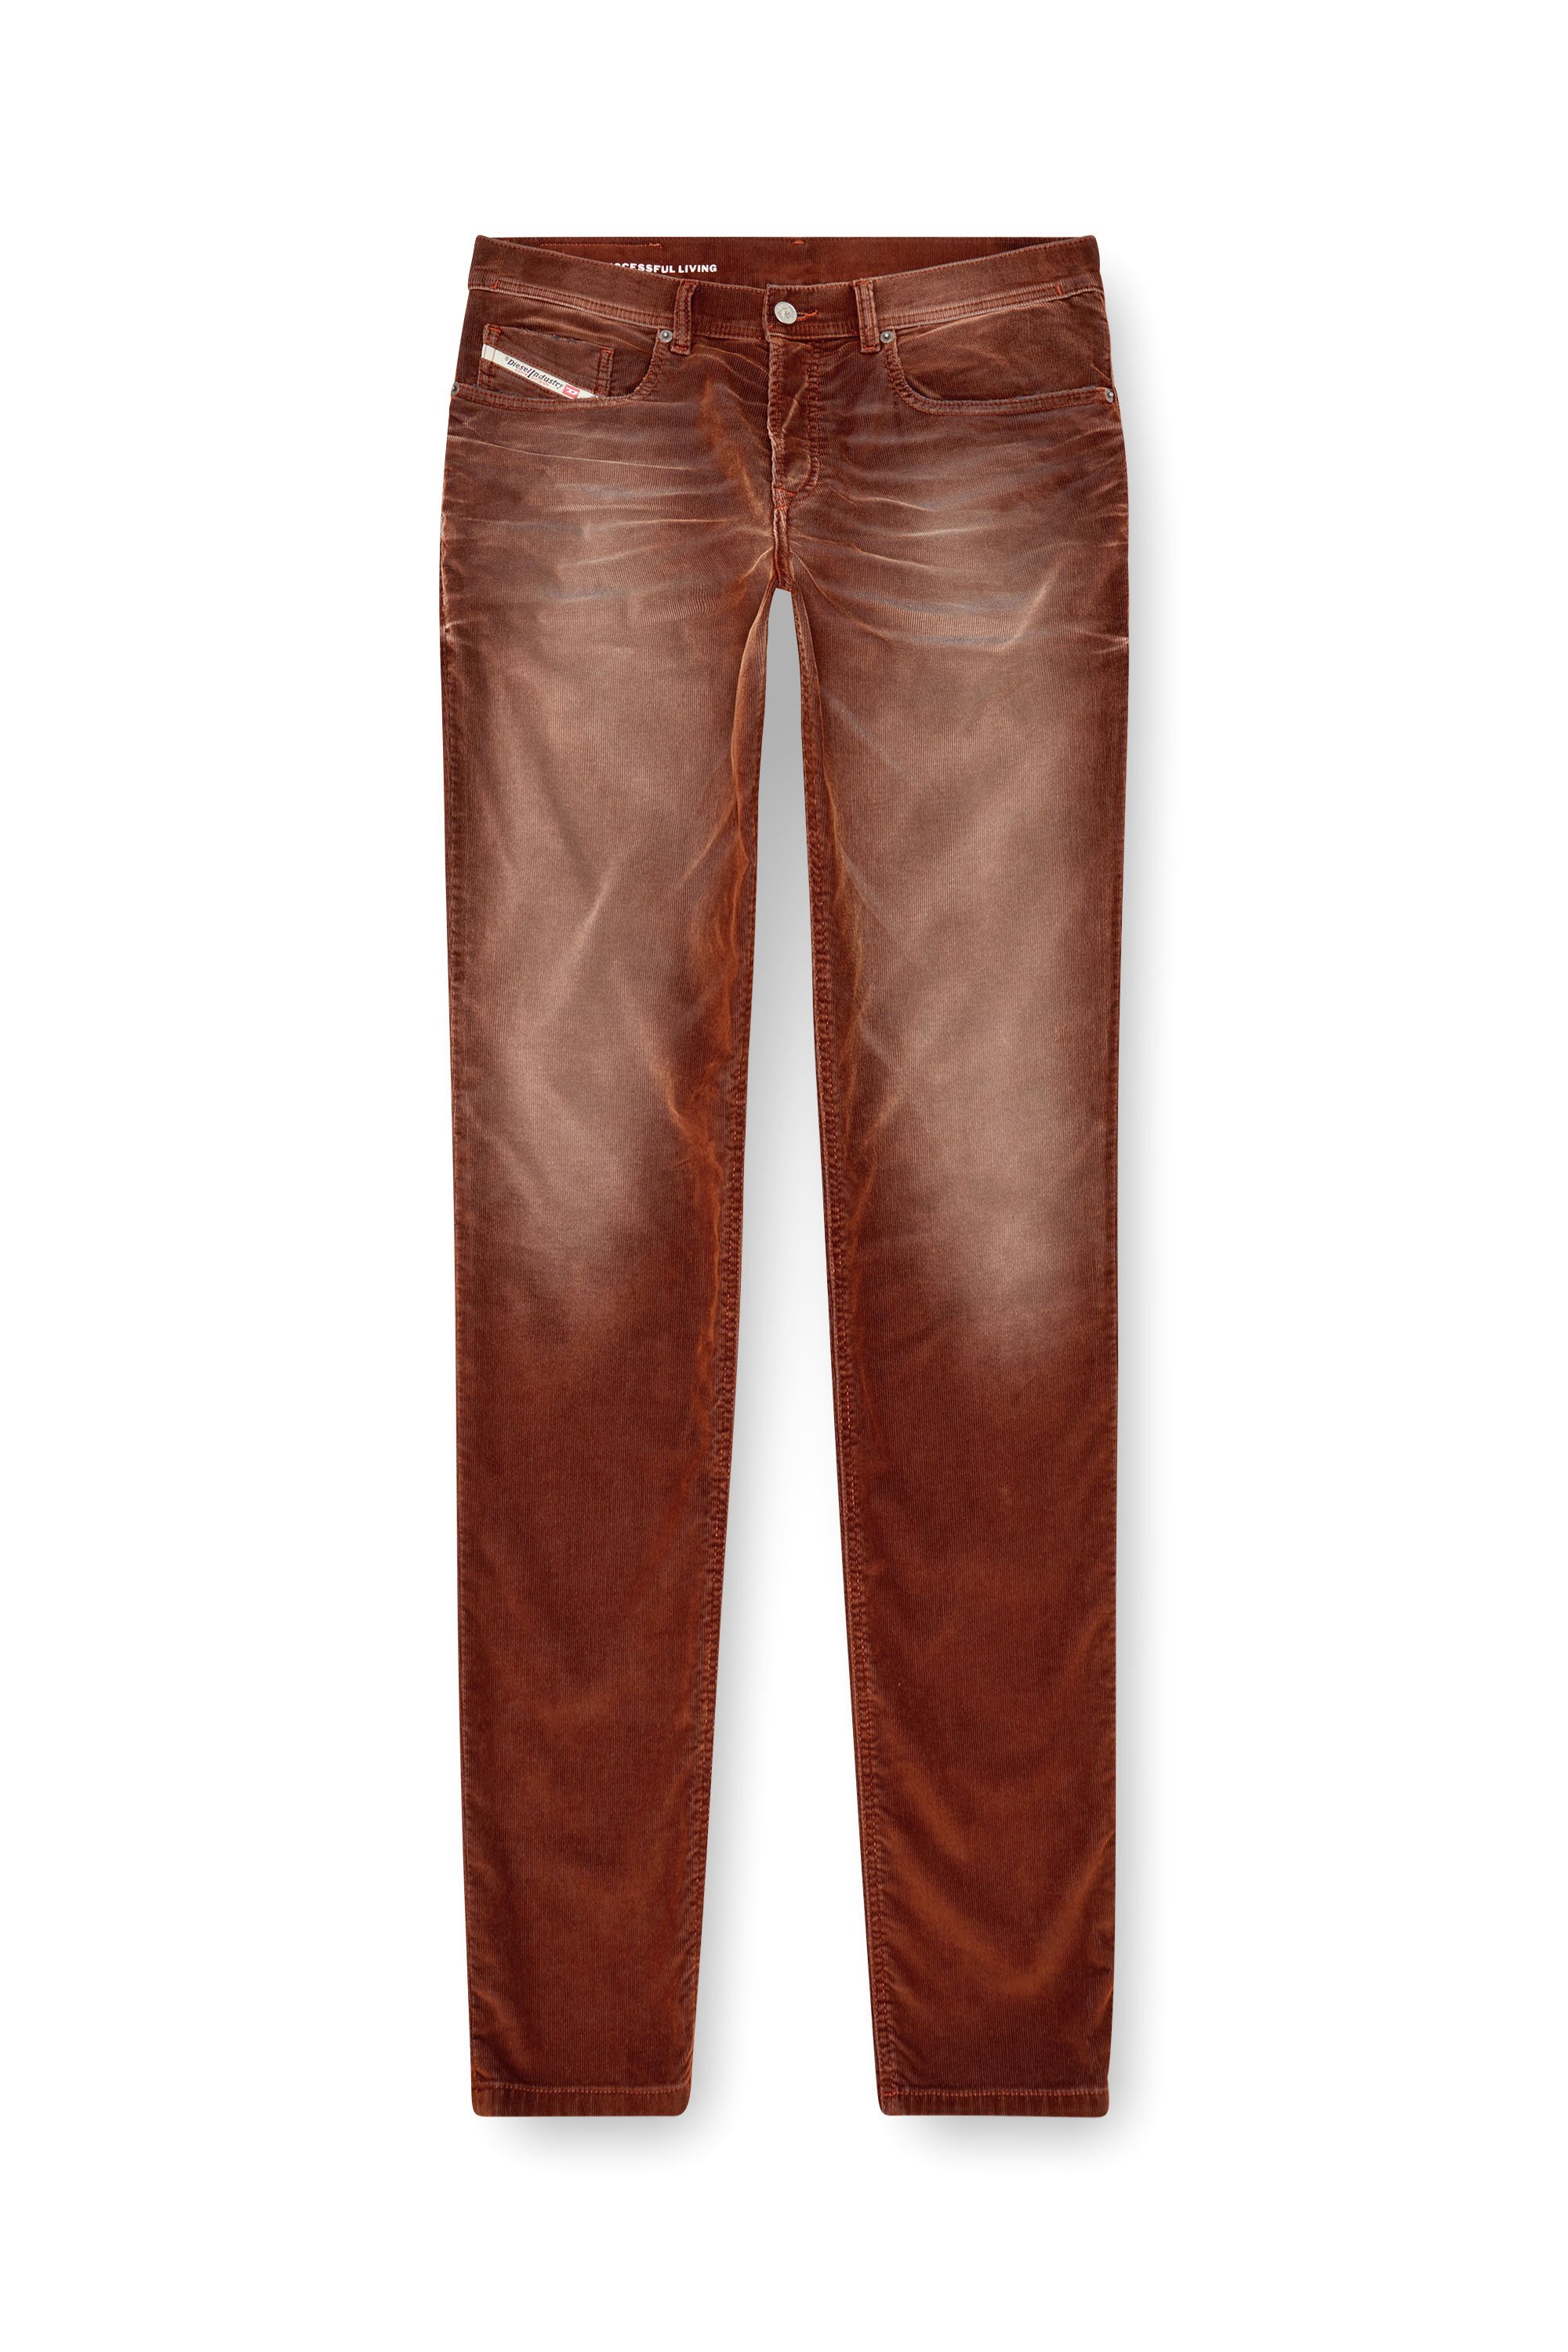 Diesel - Tapered Jeans 2023 D-Finitive 003II, Hombre Tapered Jeans - 2023 D-Finitive in Marrón - Image 3